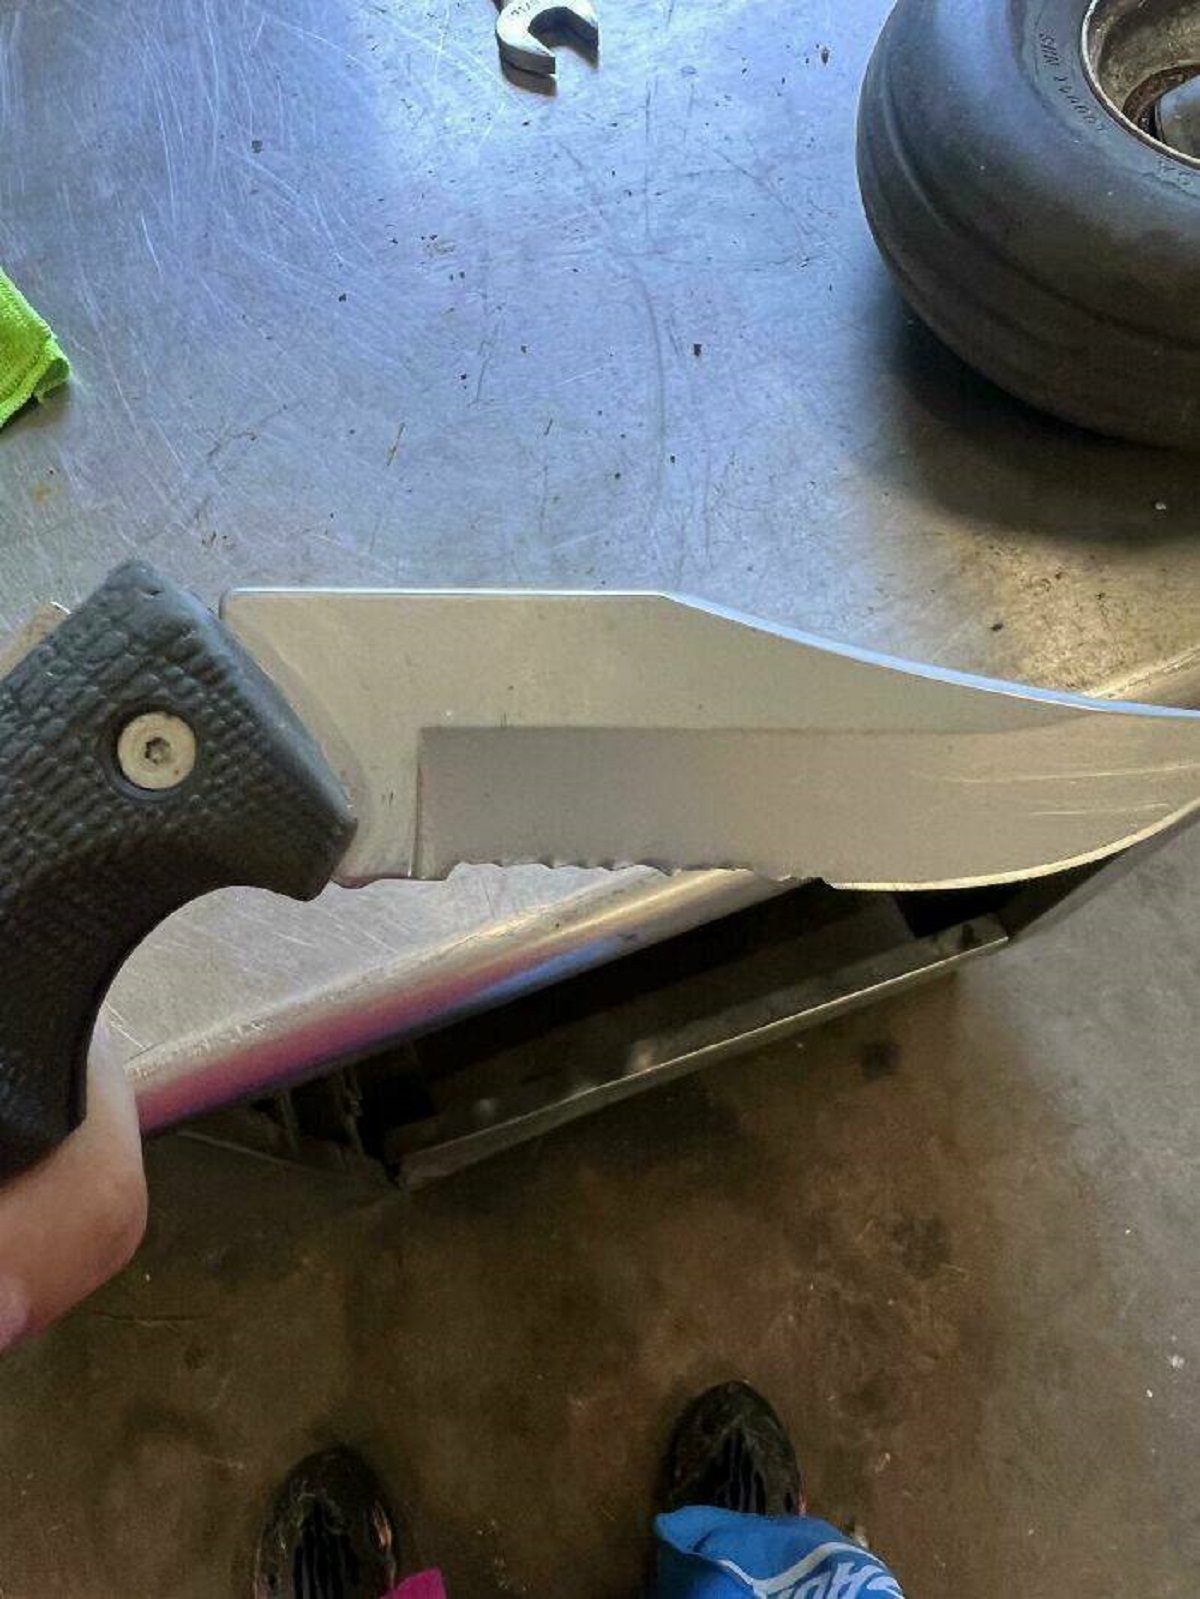 "My Coworker Found My Knife And Decided To Sharpen It For Me"